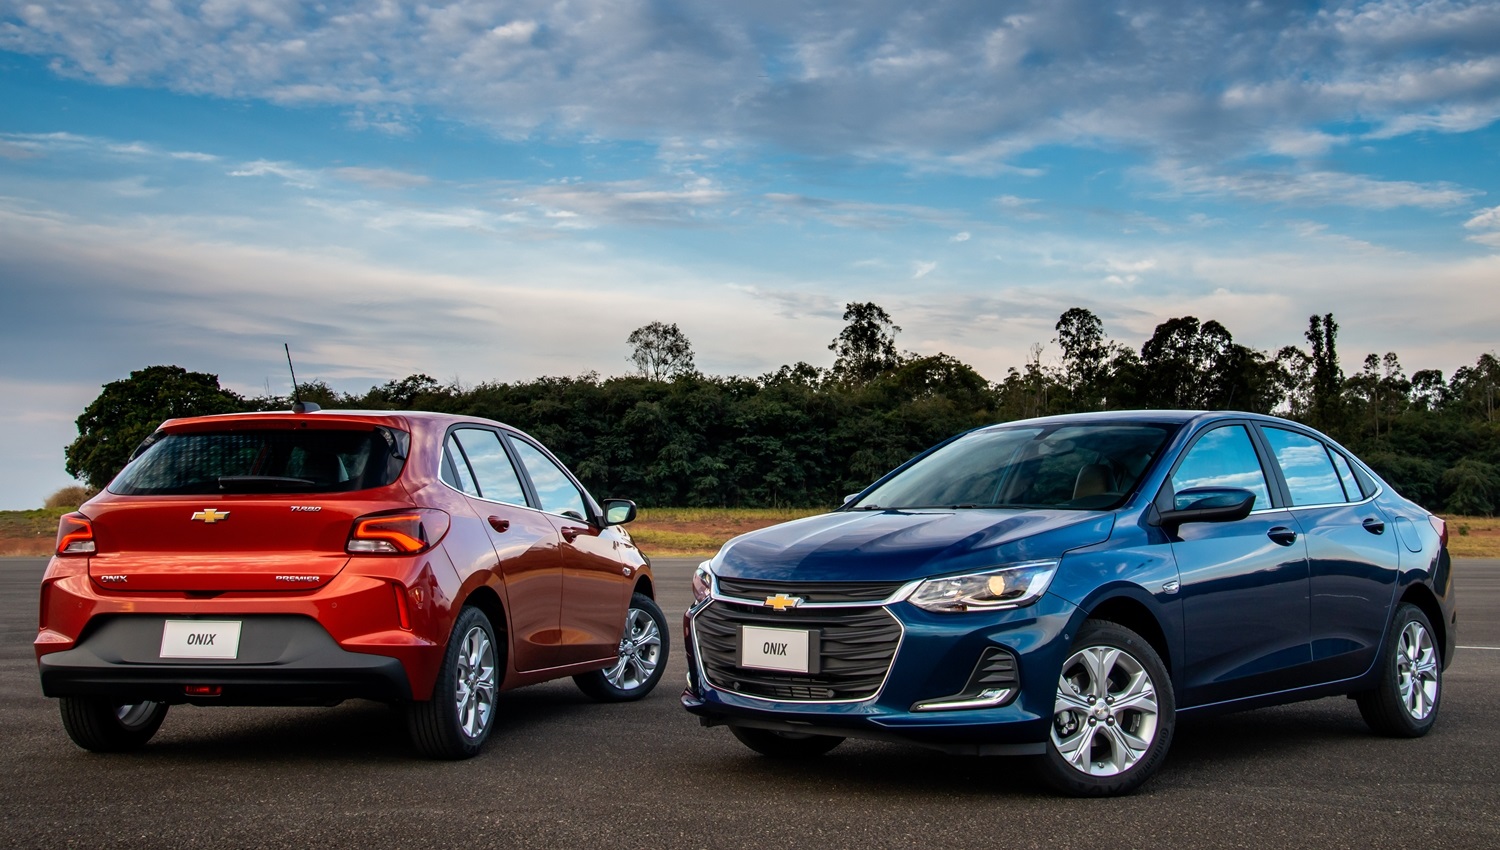 Brazil January 2023: Chevrolet (+73.1%) places 3 models in Top 4